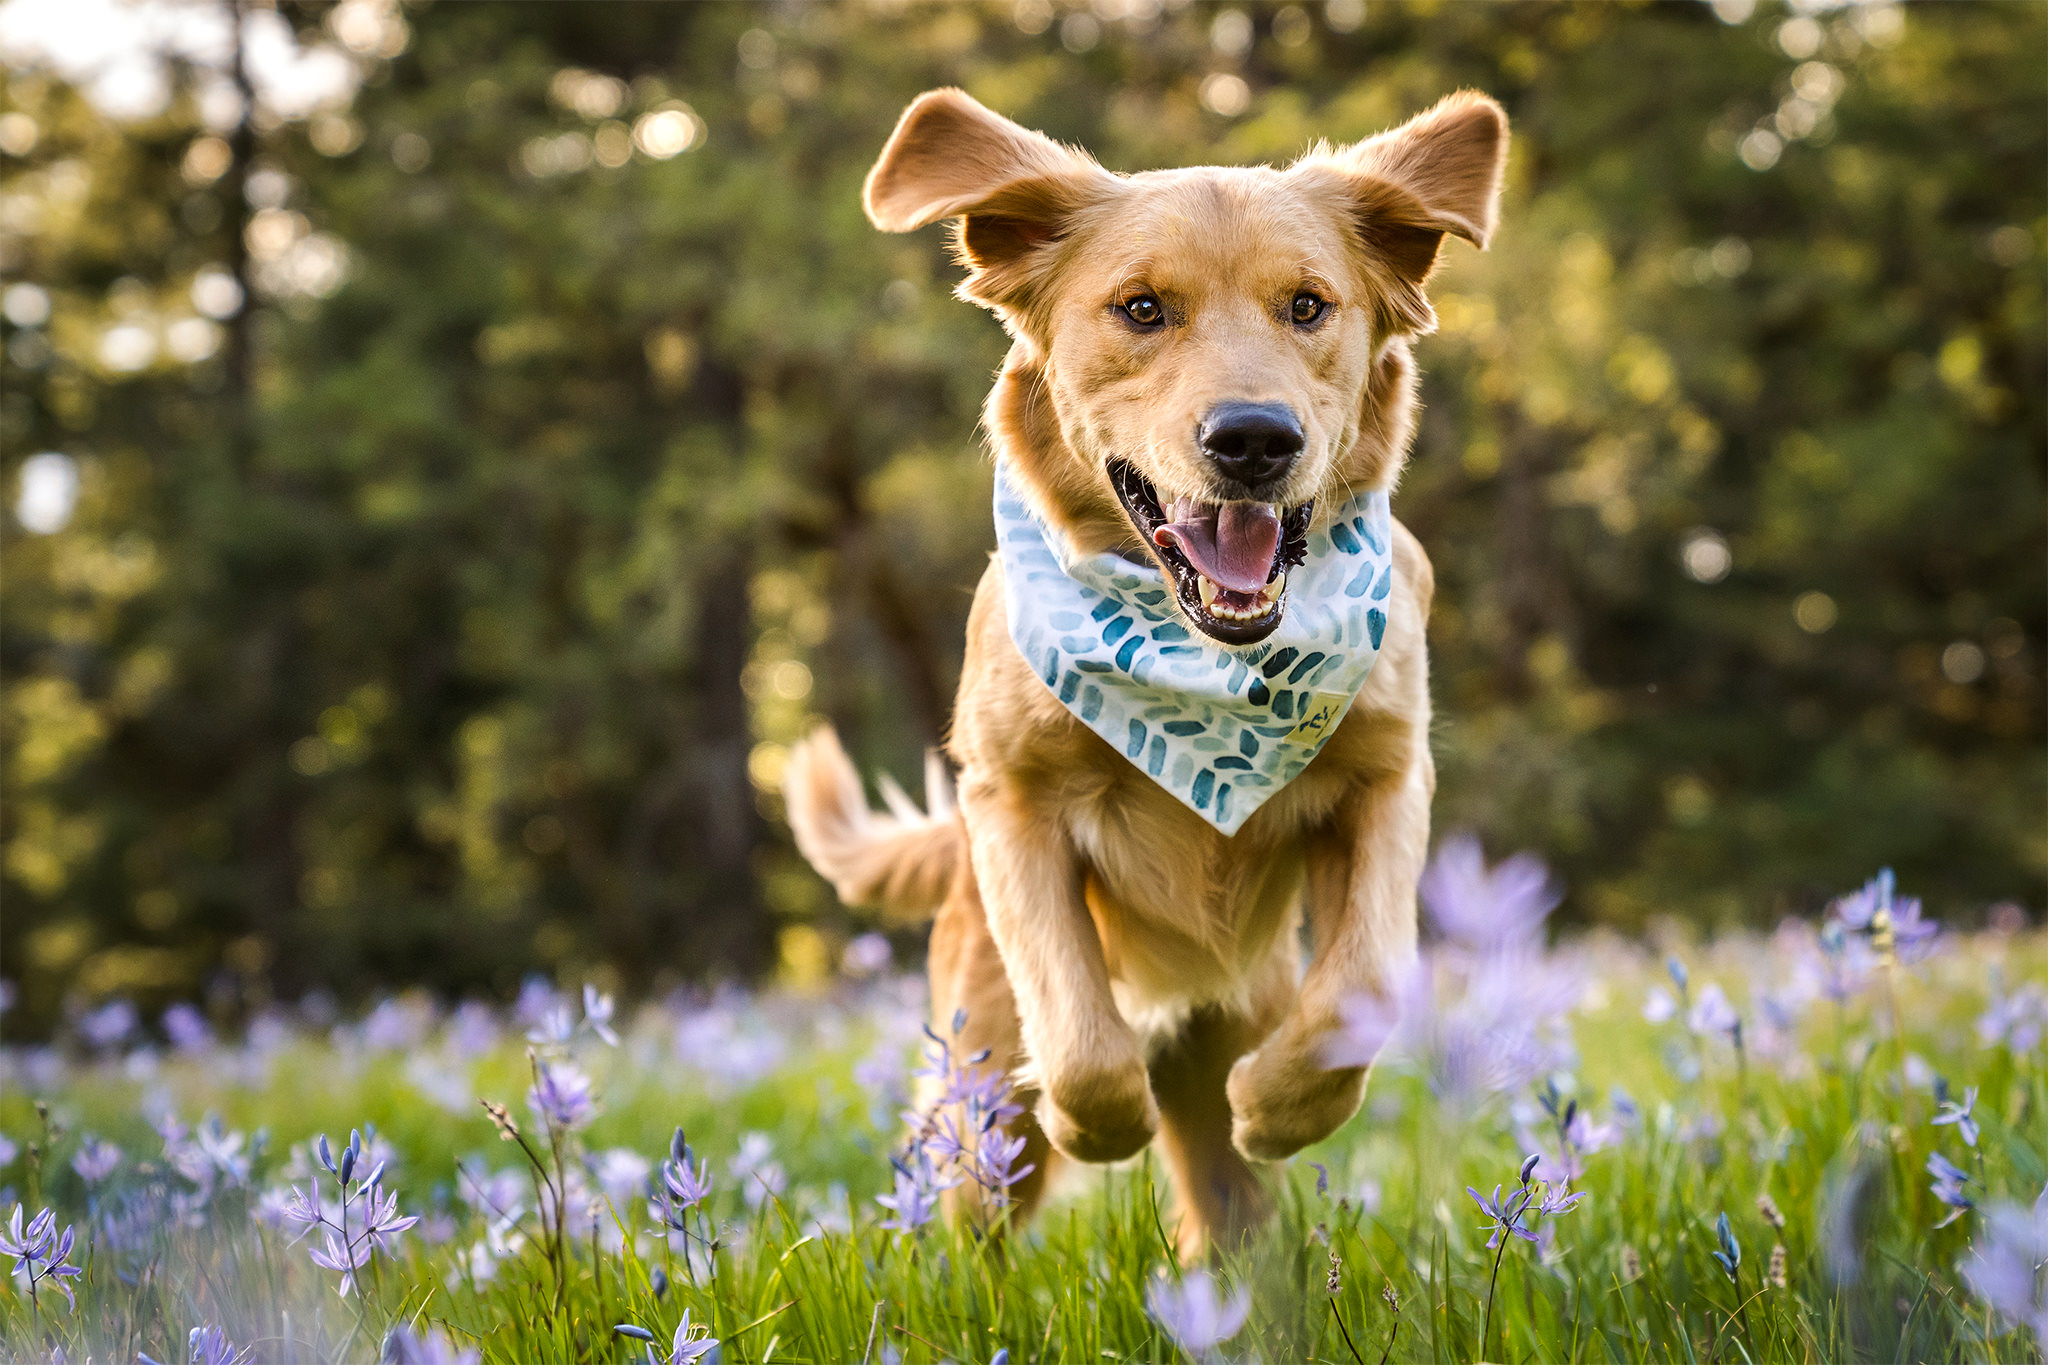 dog jumps through field of purple flowers in Washington state